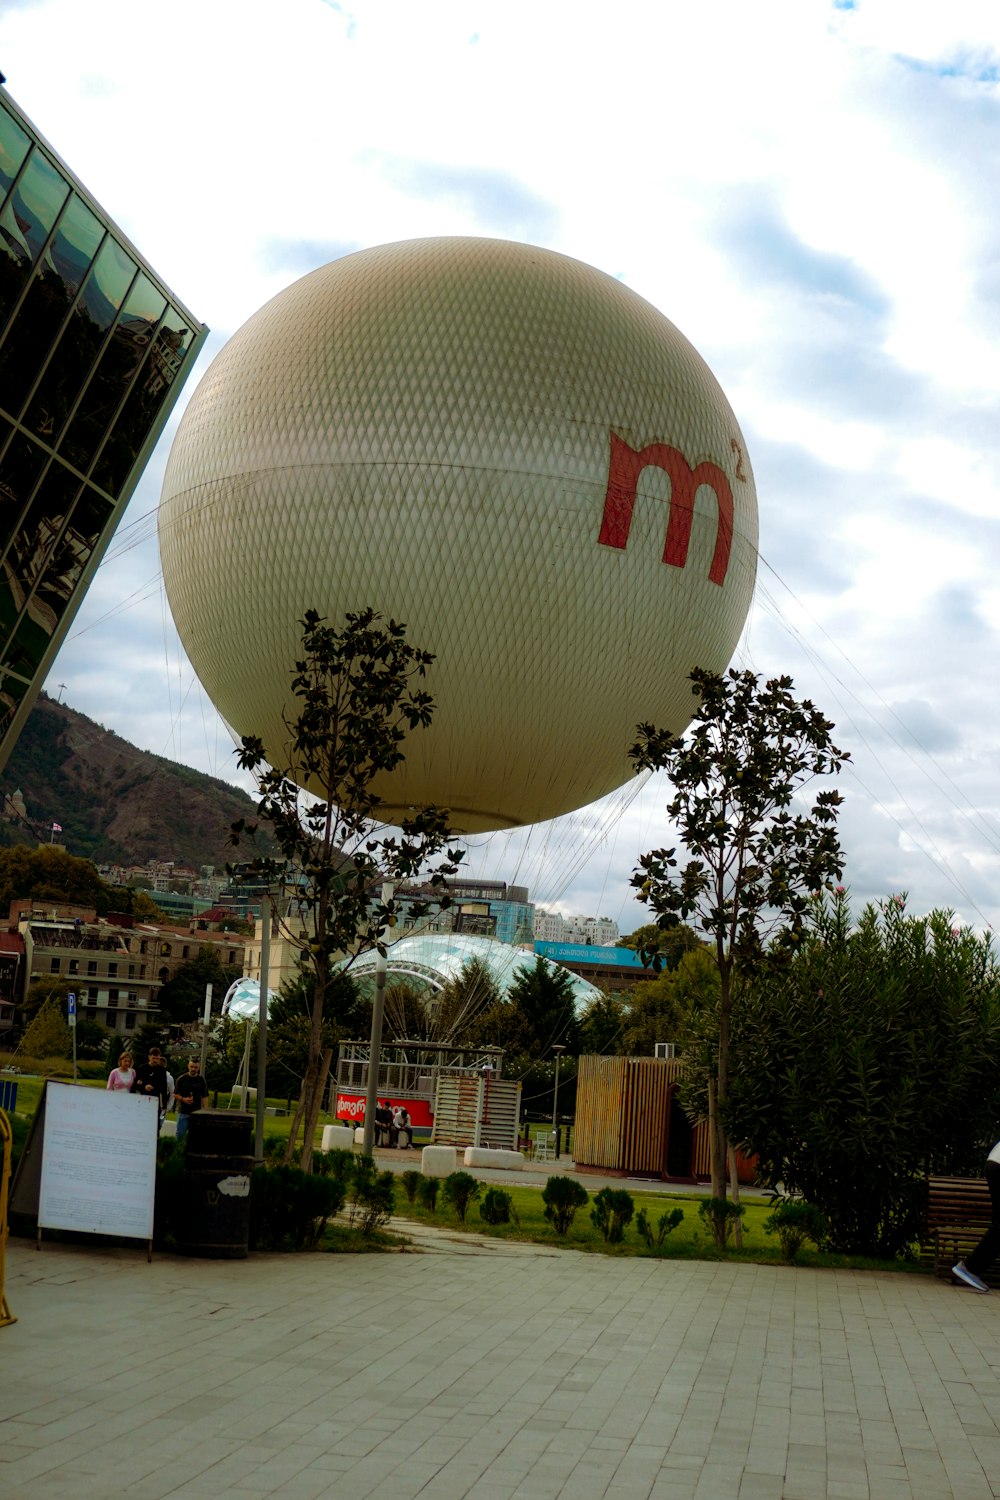 a large balloon with the letter m on it